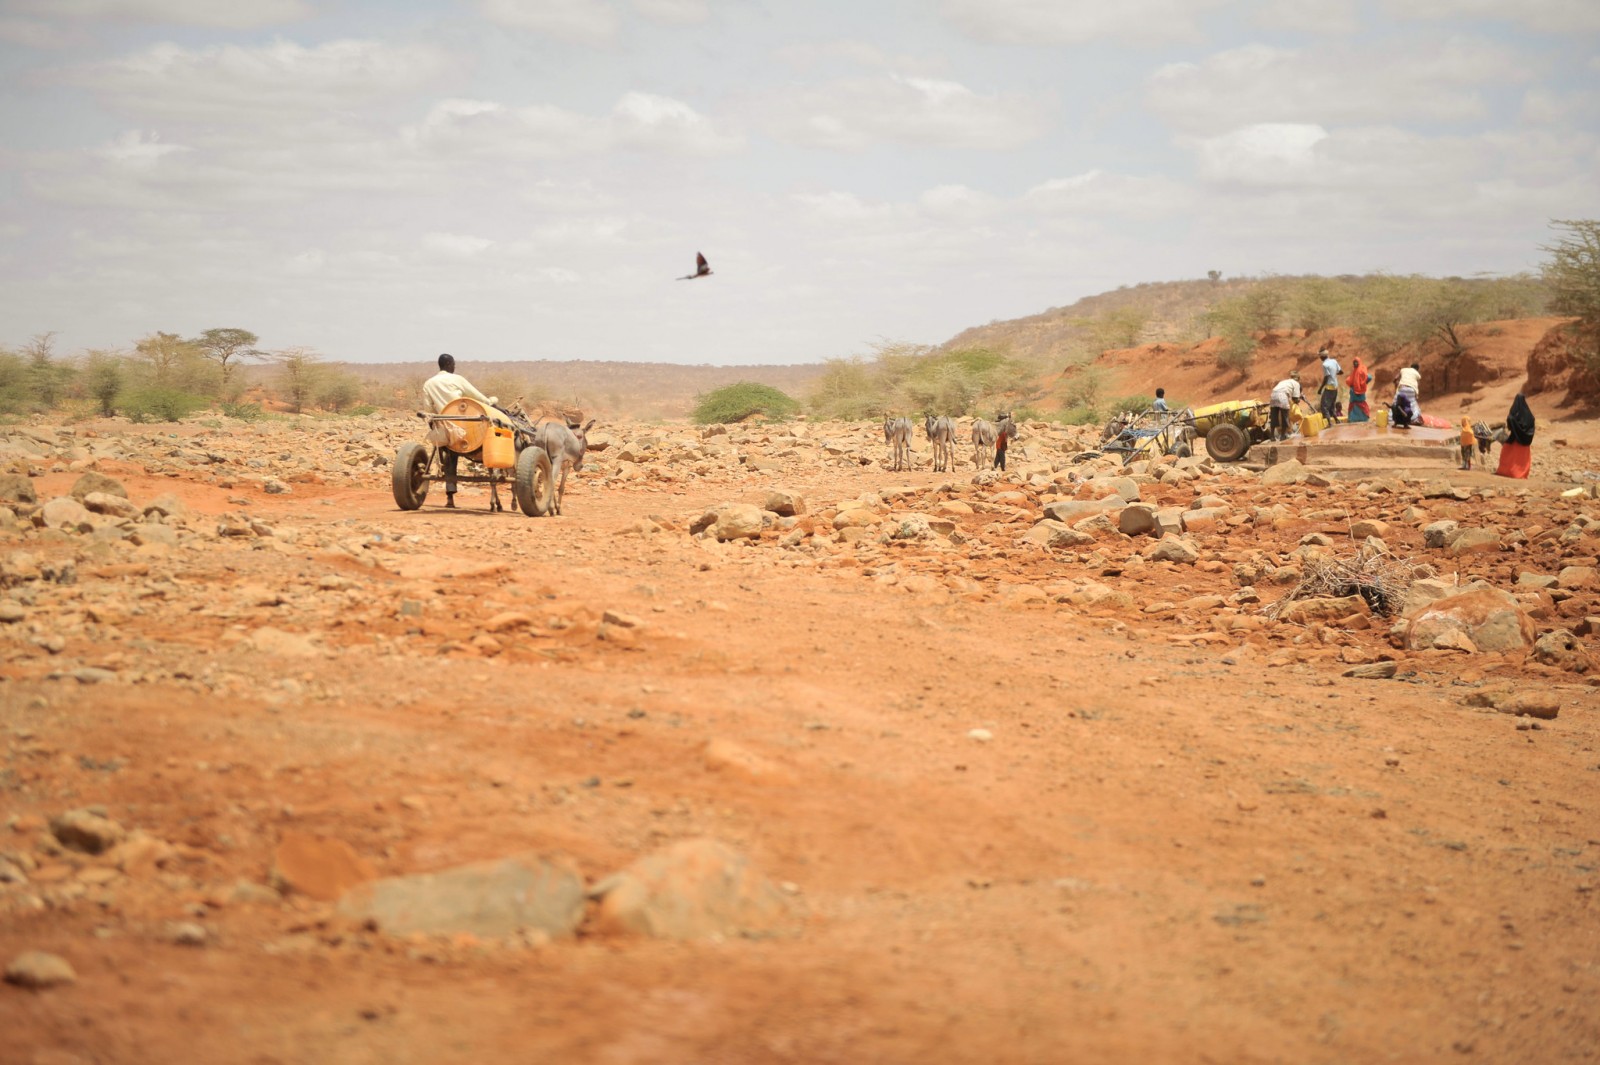 A man walks towards a well with his donkey cart to collect water in Garbahaarey town in the Gedo region of Somalia